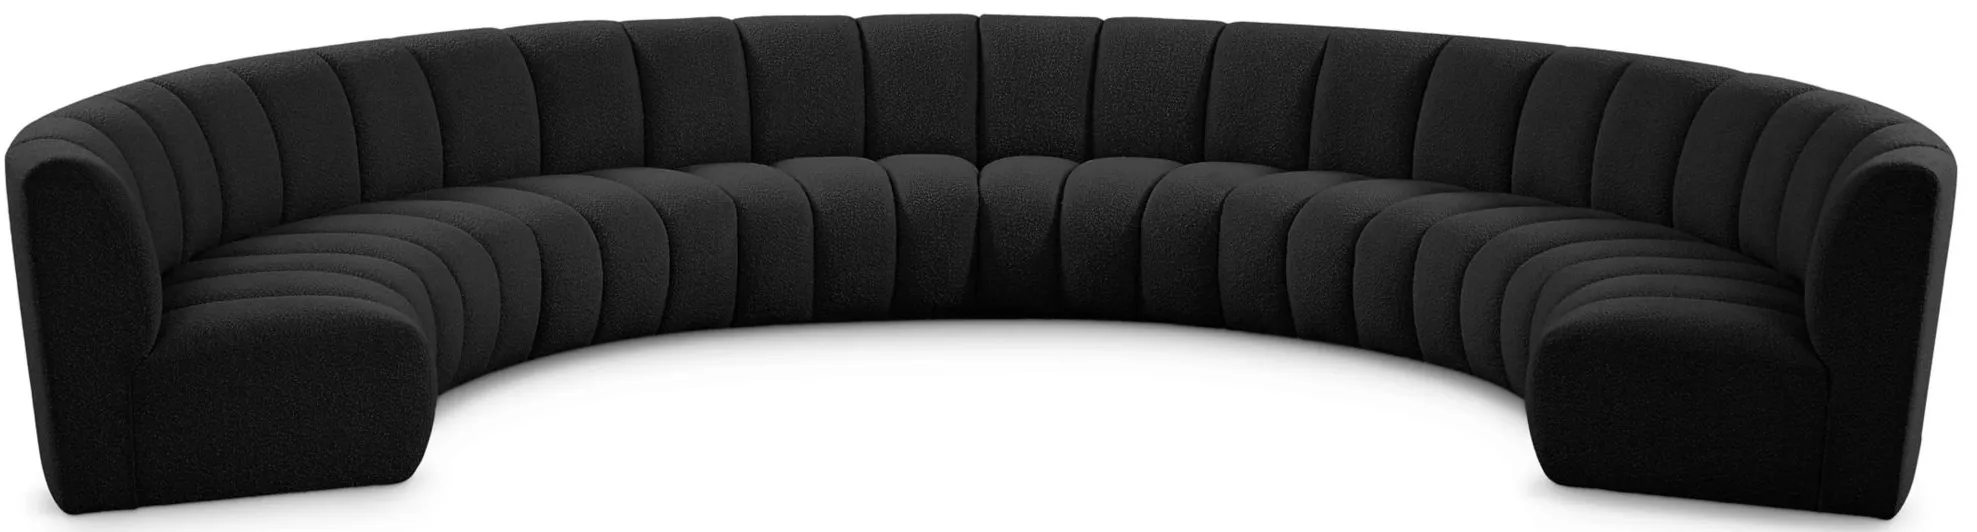 Infinity 8pc. Modular Sectional in Black by Meridian Furniture